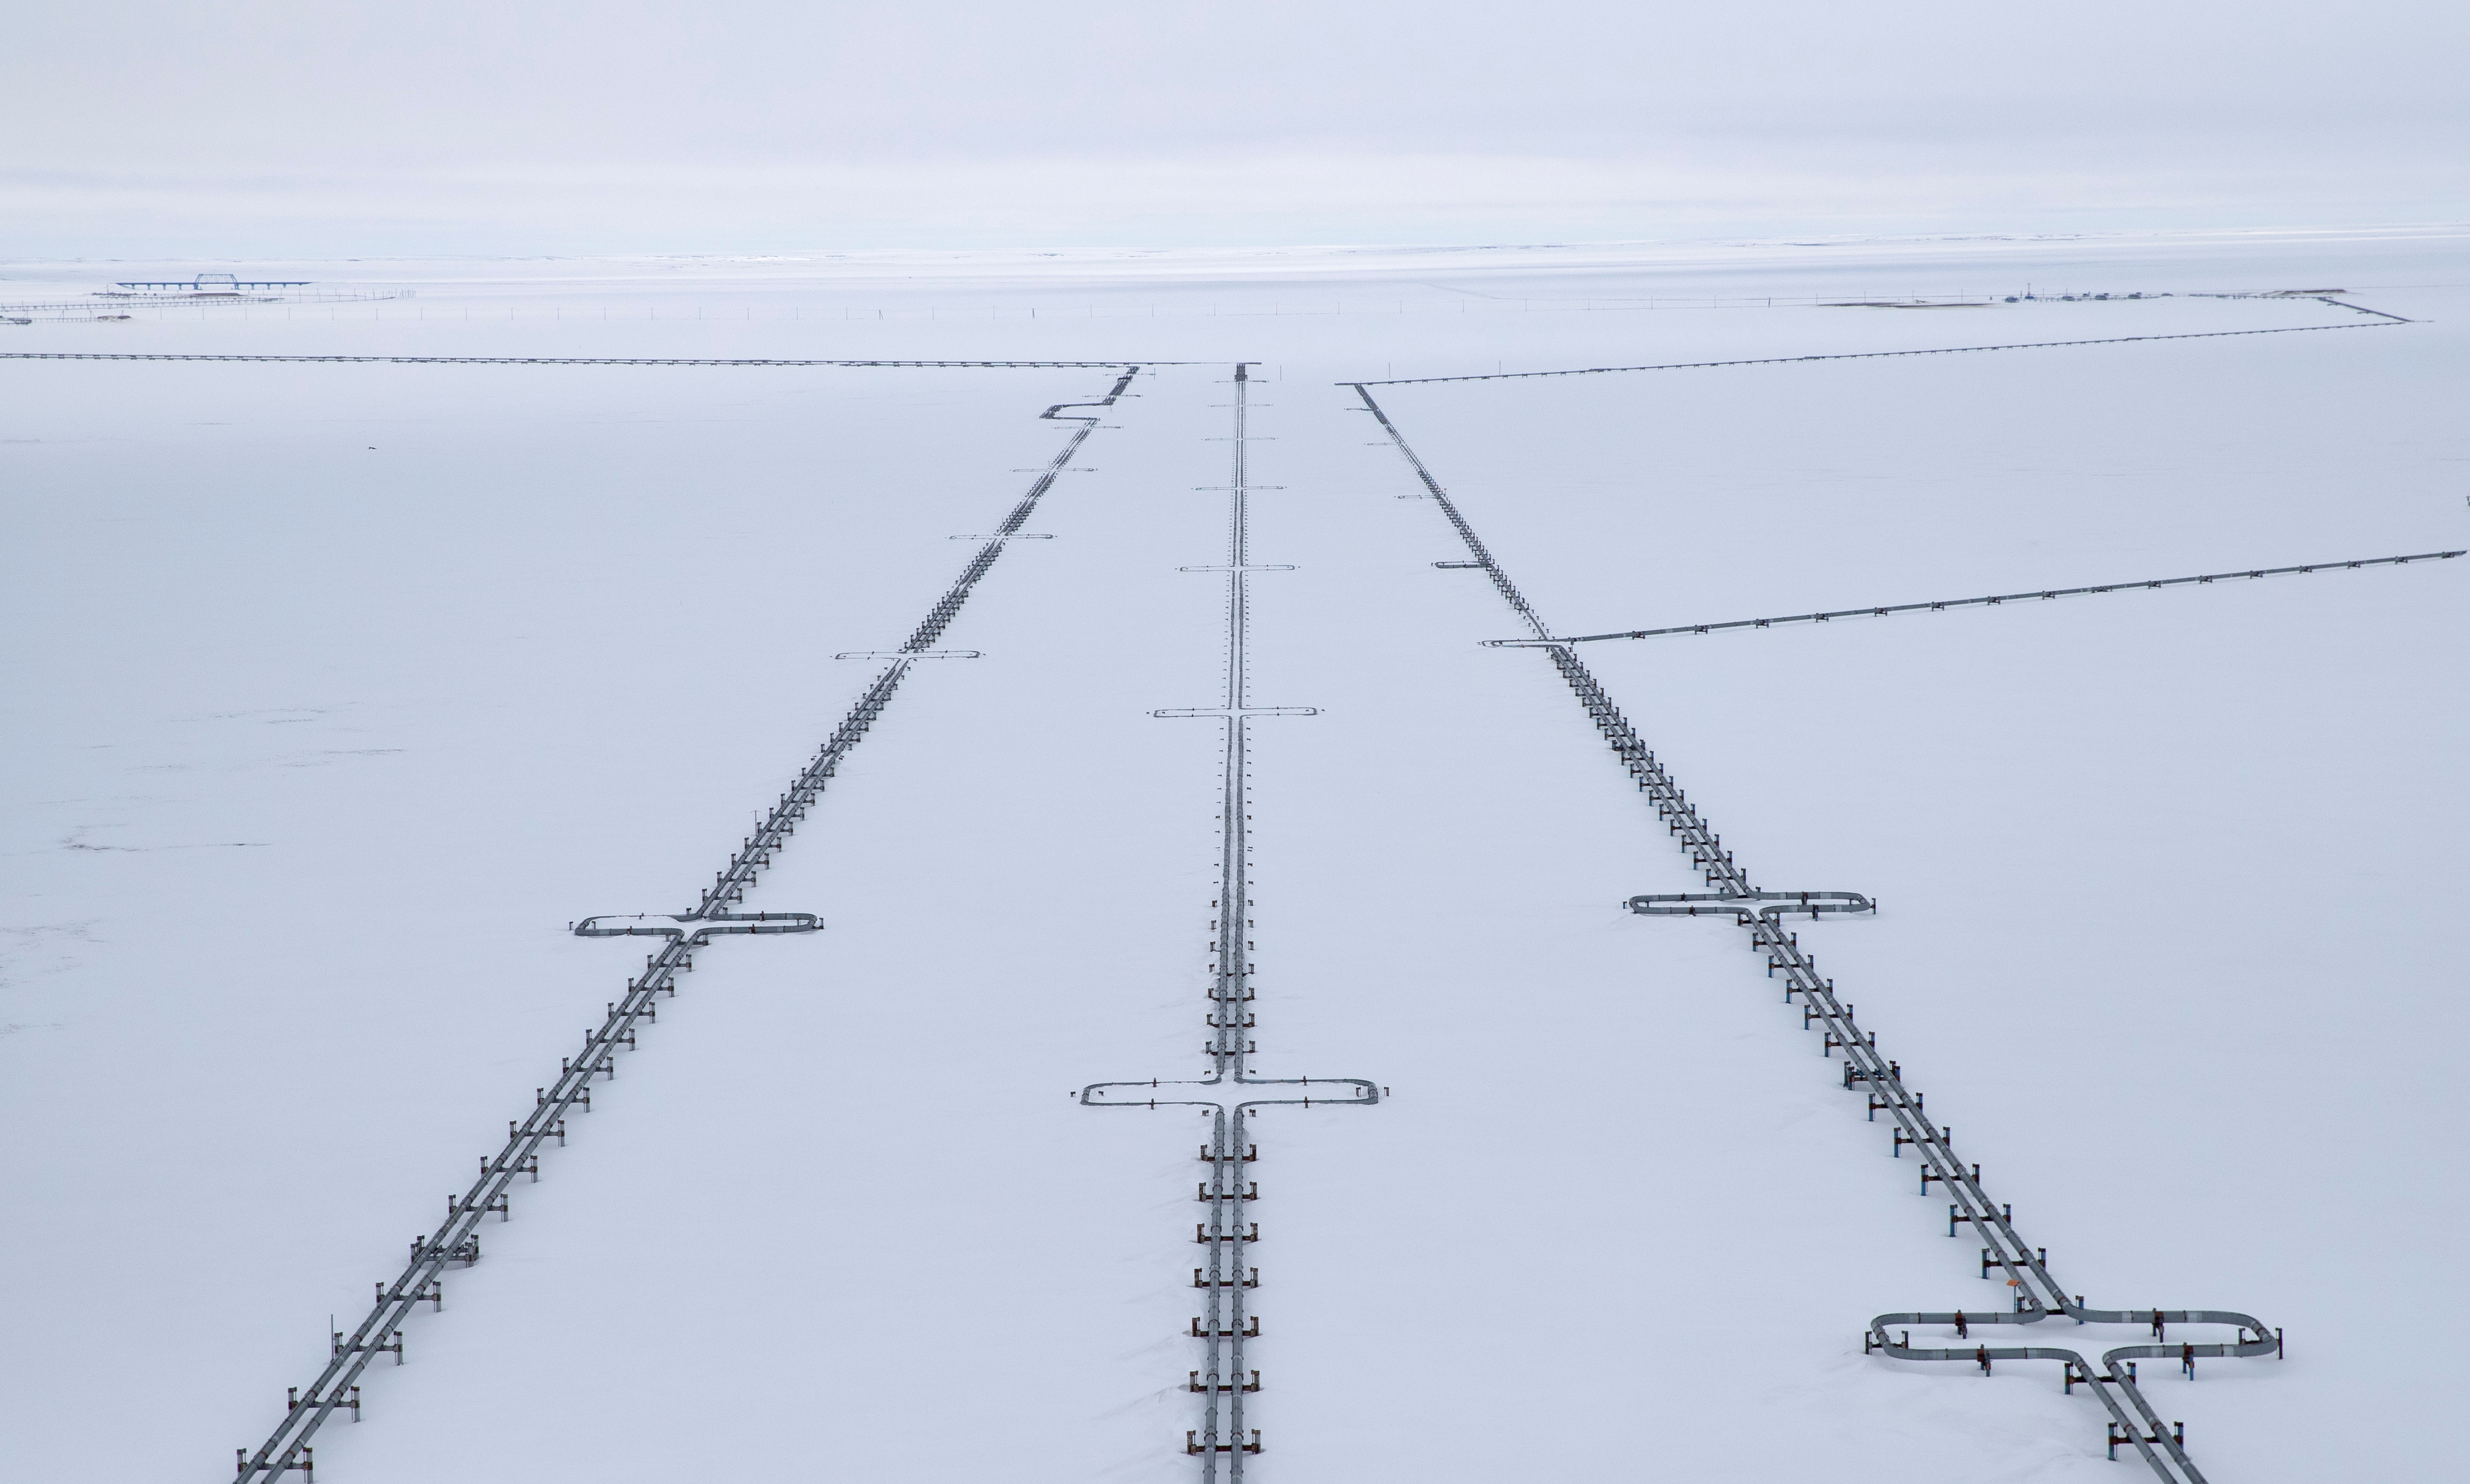 A view shows pipelines near Gazprom's gas processing facility at Bovanenkovo gas field